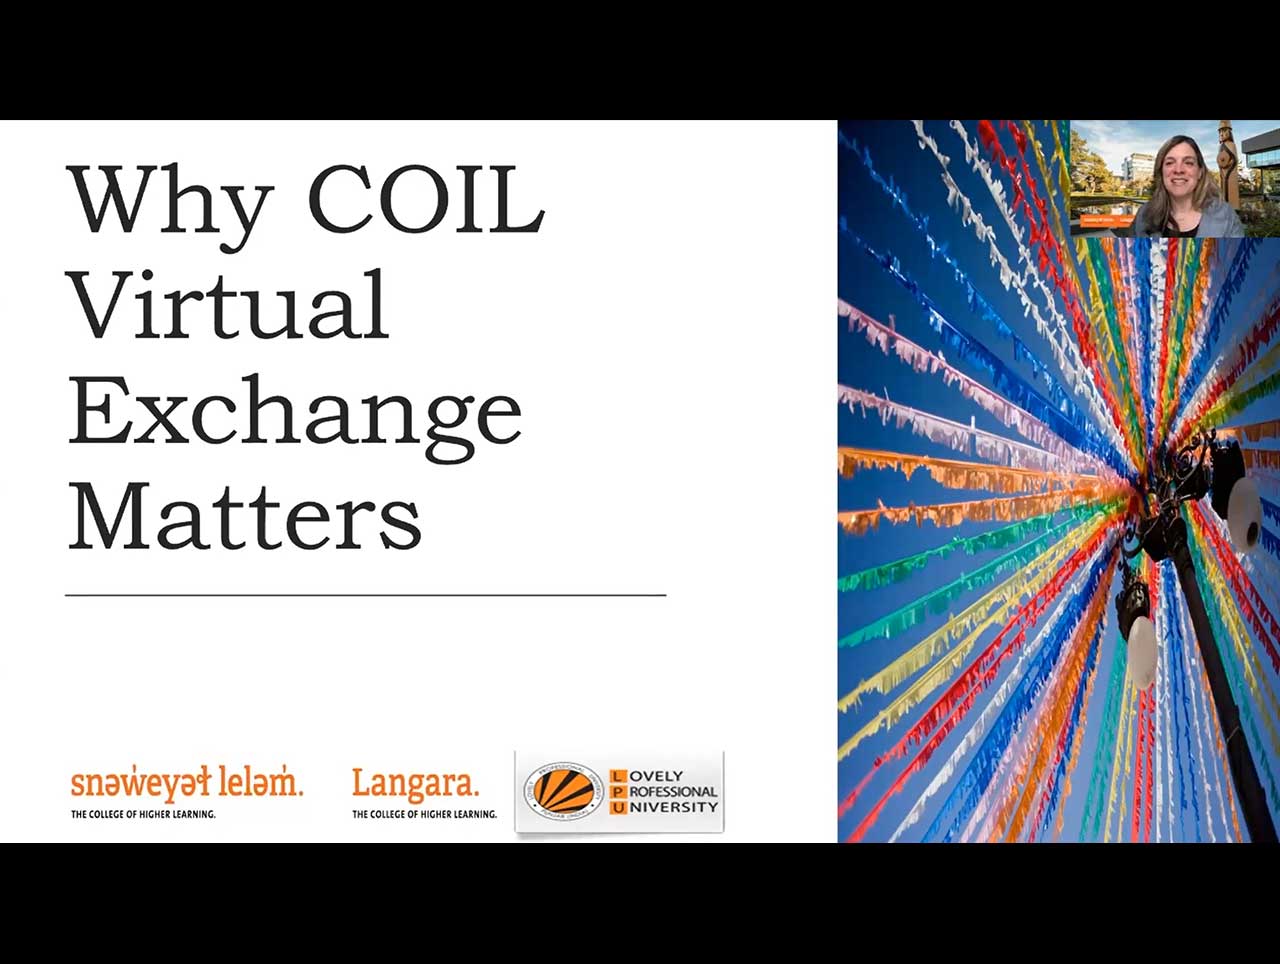 Why COIL Virtual Exchange Matters